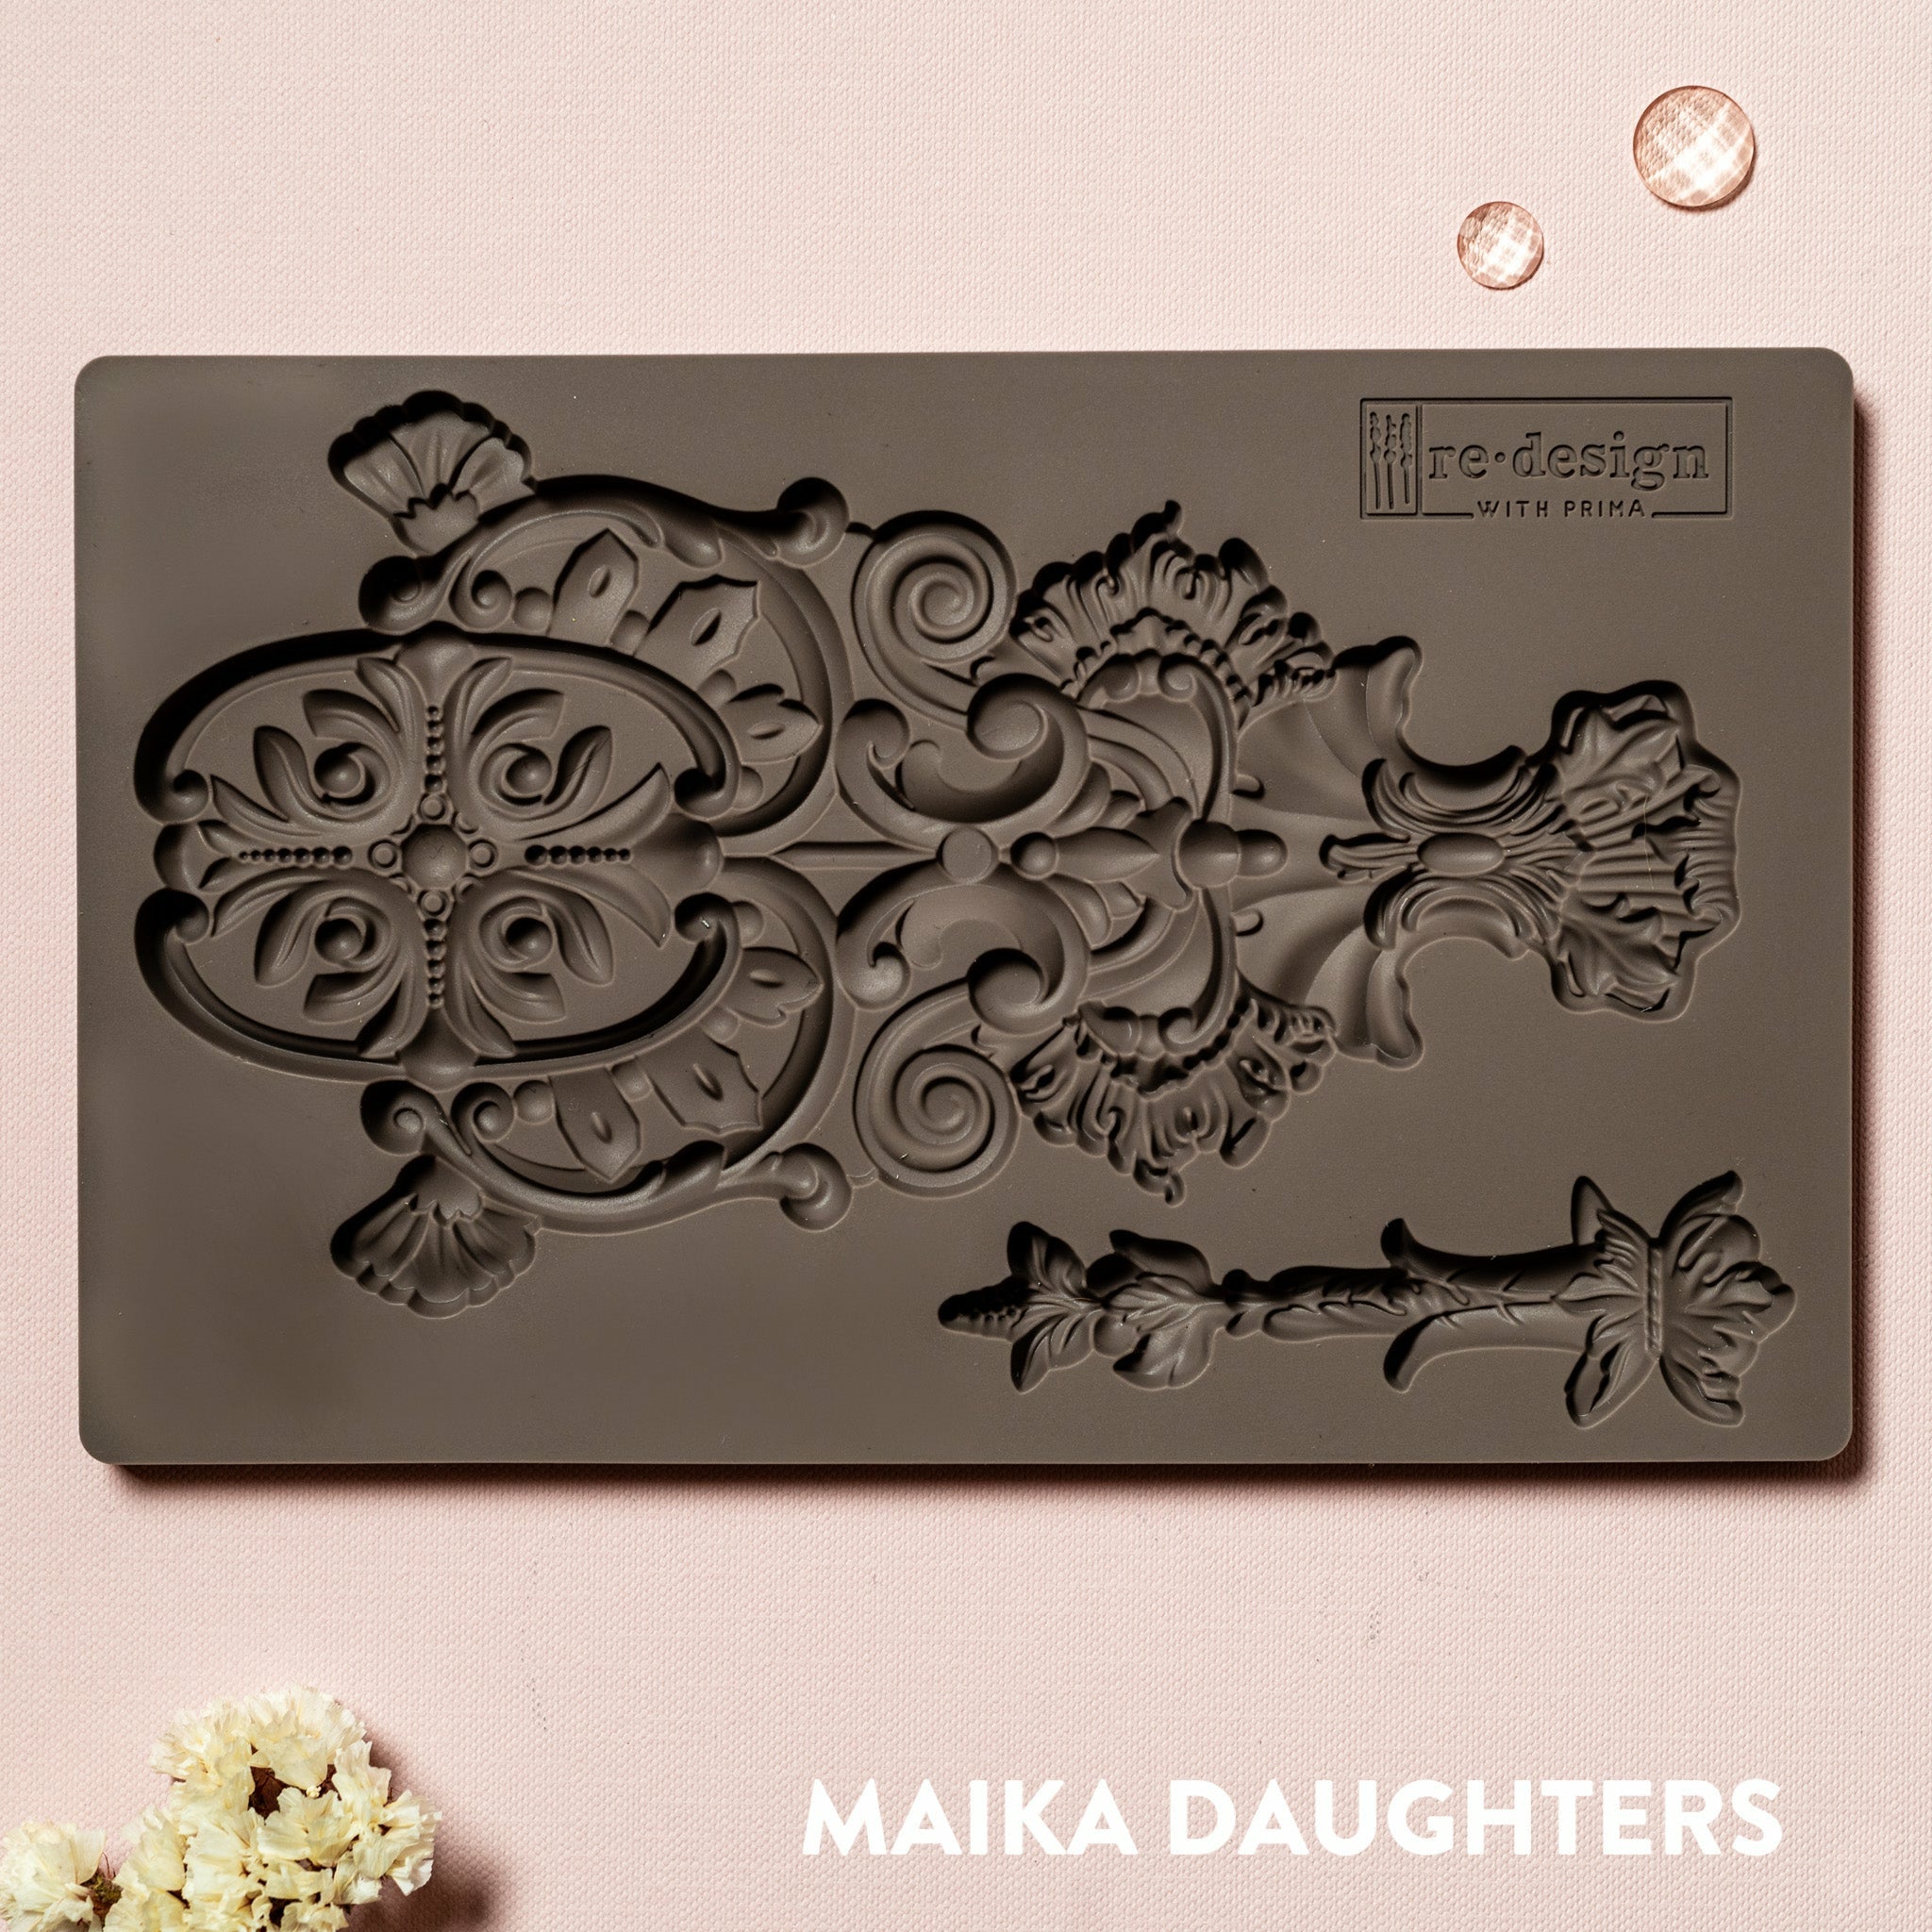 Golden Emblem mold tray on a pink background. A white Maika Daughters logo on the bottom right.